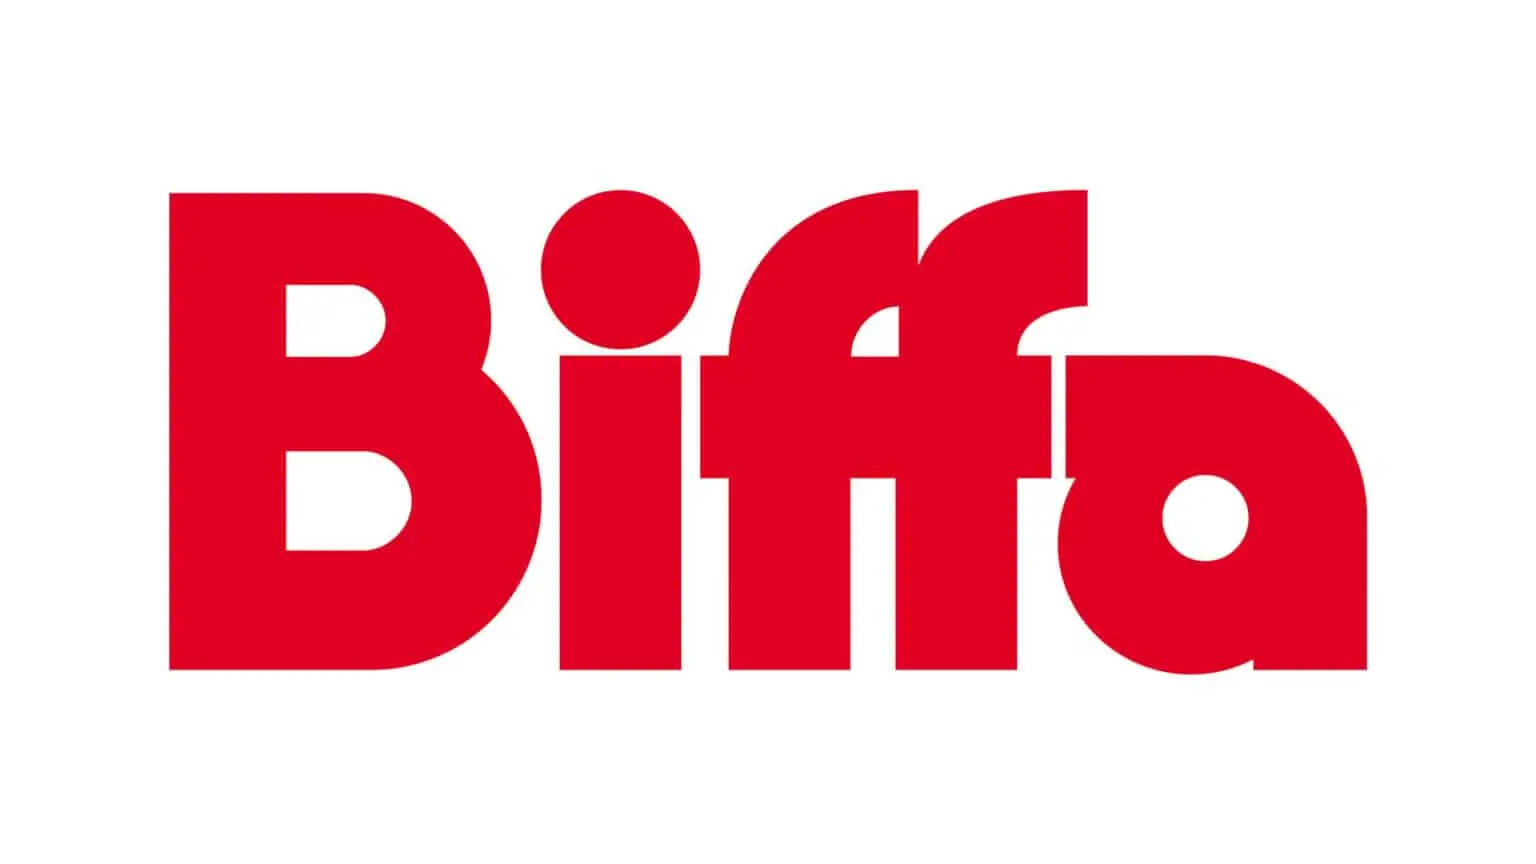 A red logo with the word biffa on it representing a Commercial Cleaning company.